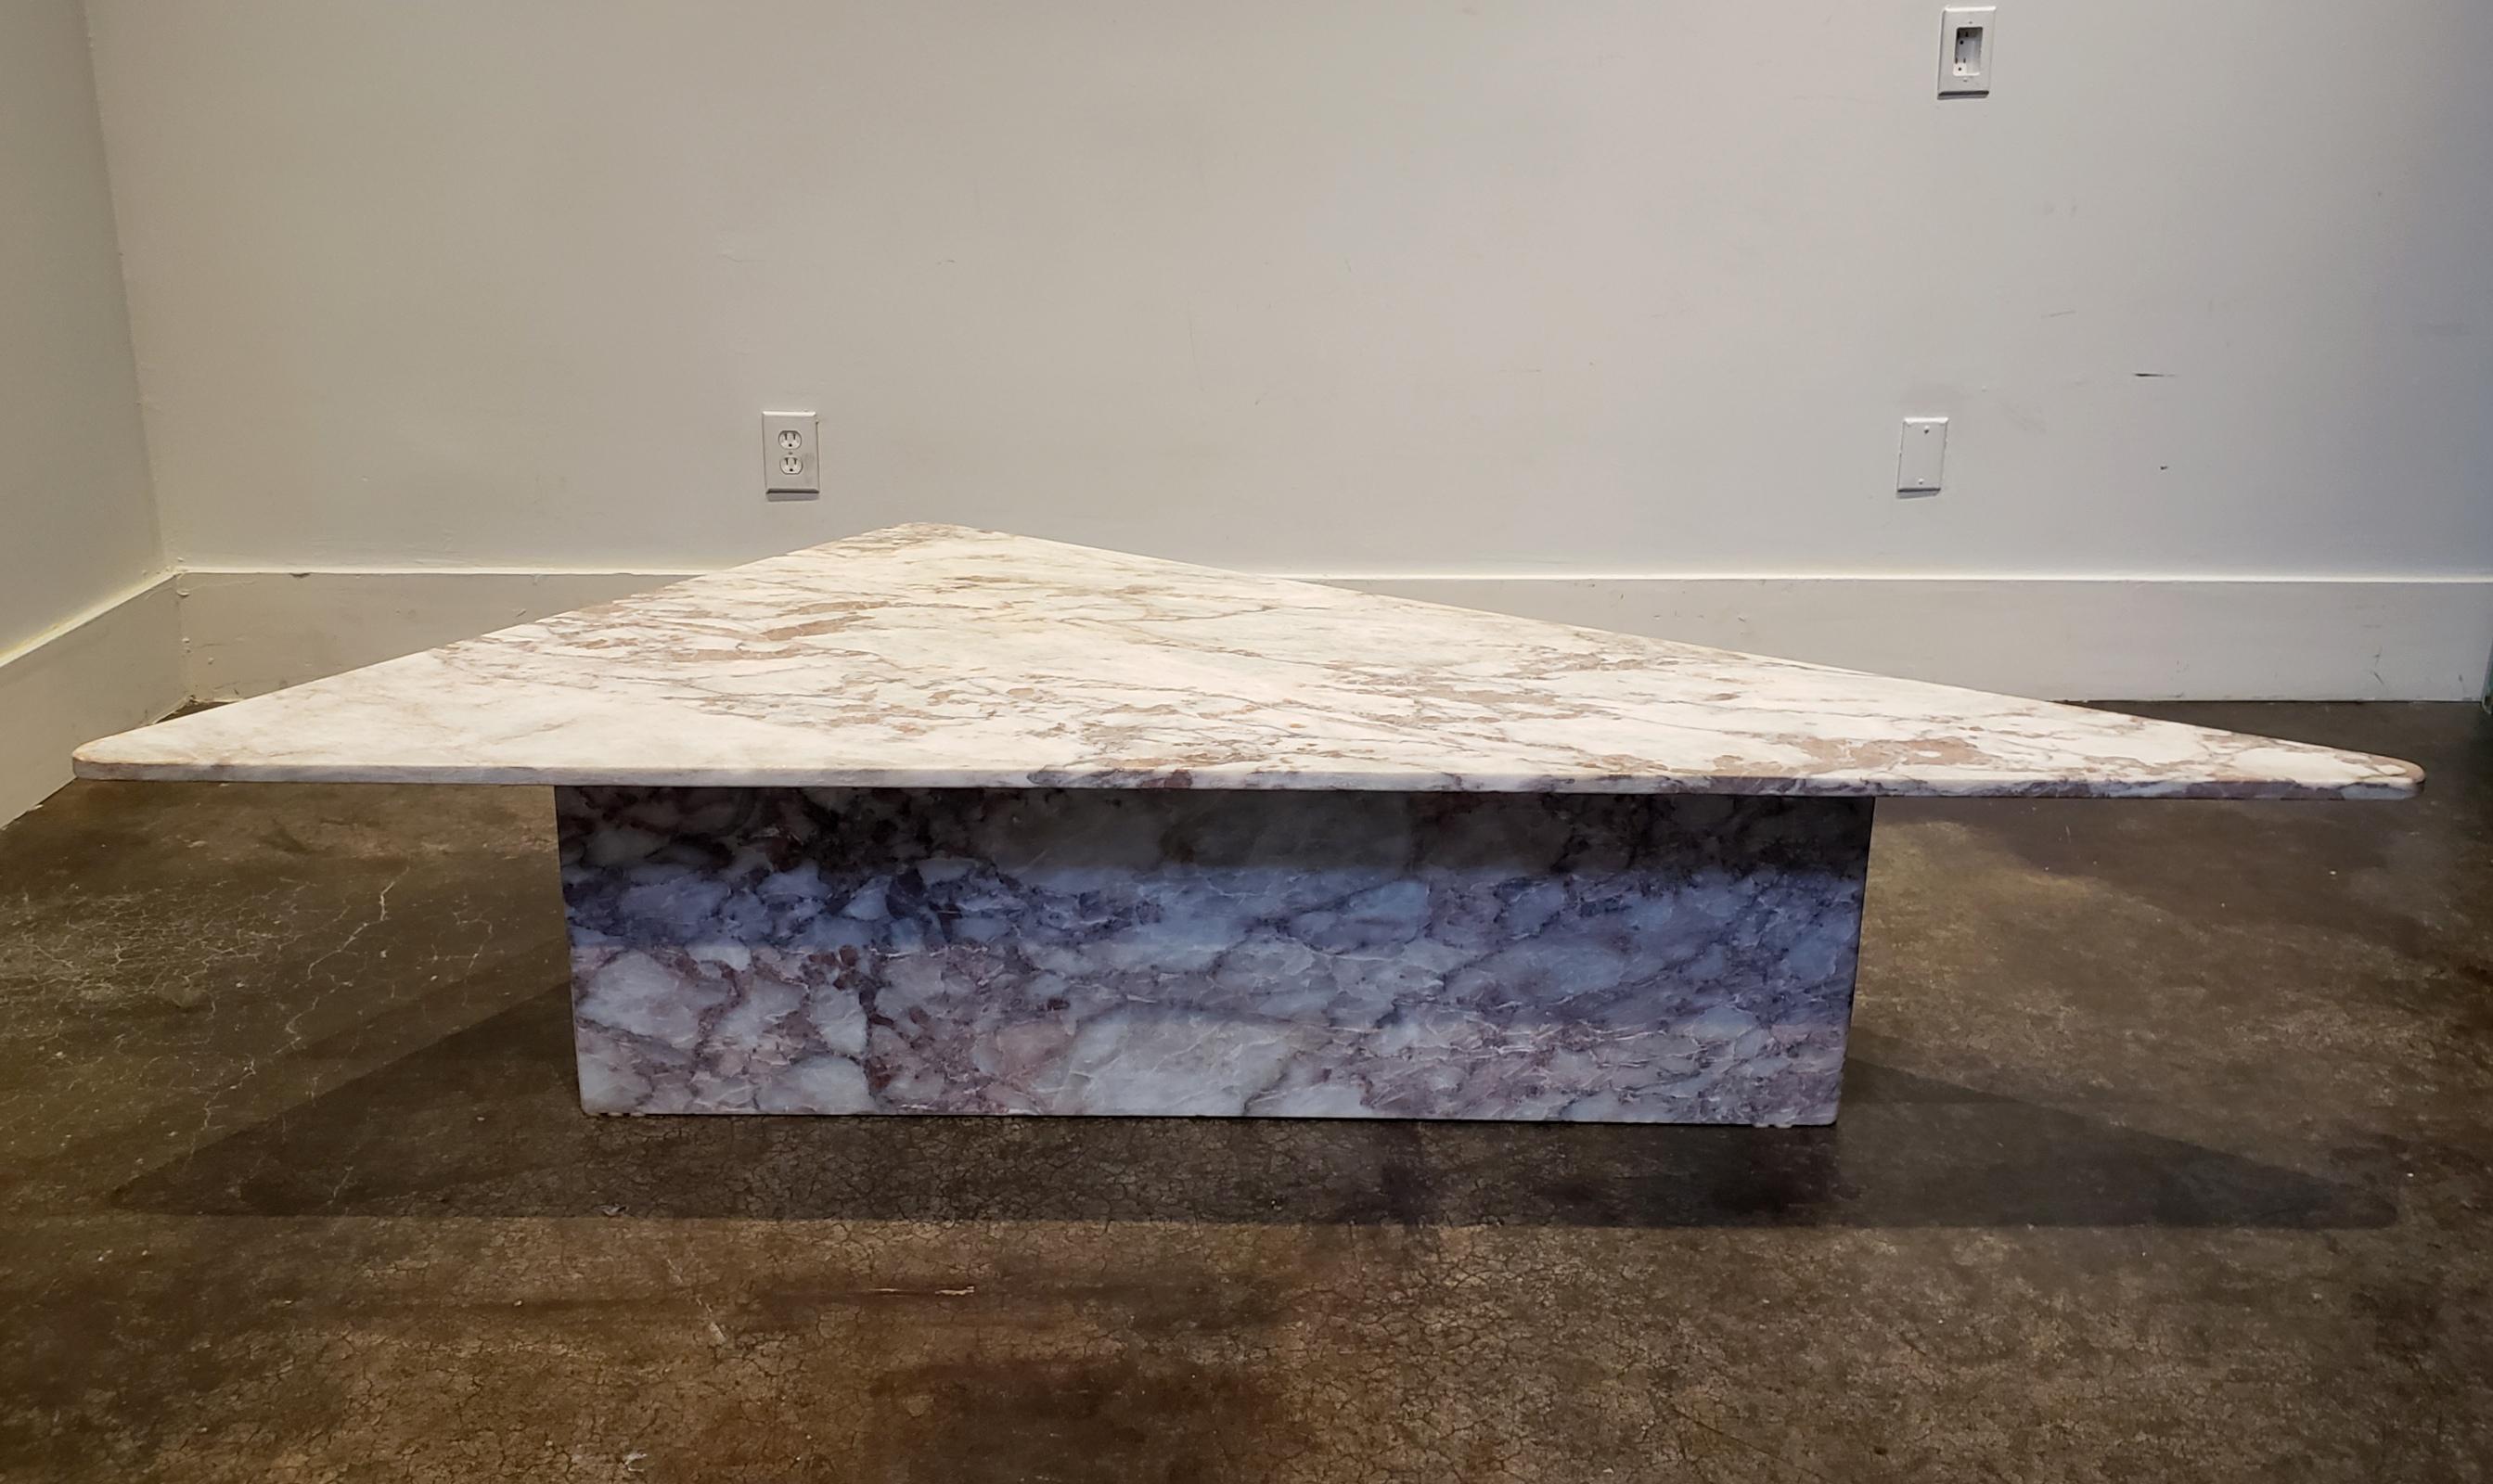 1970s Italian coffee table, beautiful white marble with pinkish gray veins. Unique triangular shape with rounded edges.

Triangular top measures 81.5 x 44.5 x 69